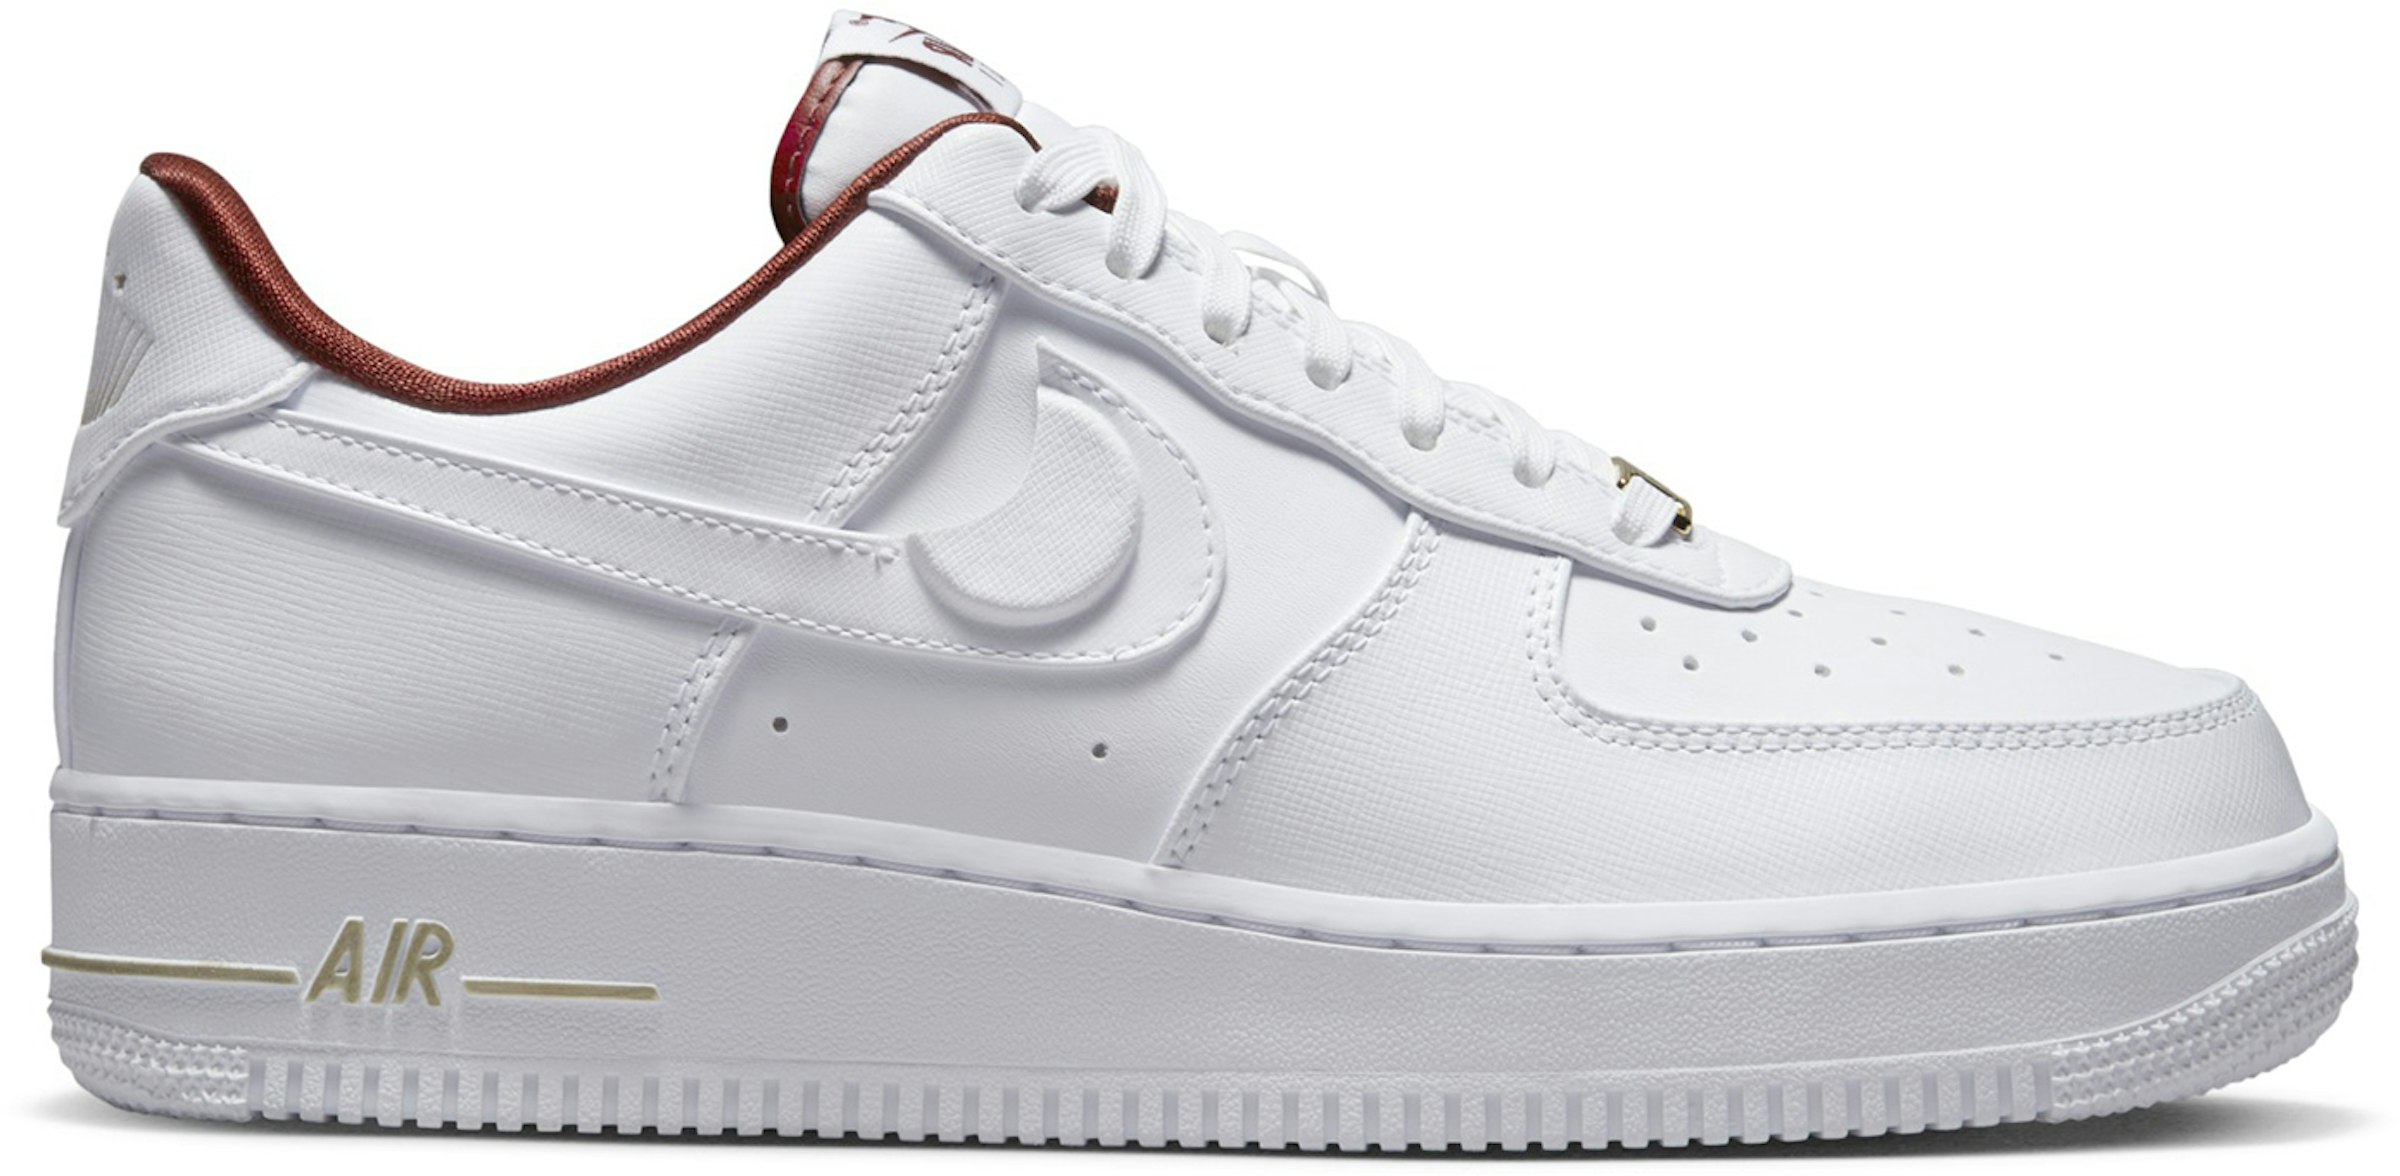 Nike Air Force 1 Low '07 SE Just It Summit White Team (Women's) - DV7584-100 - US